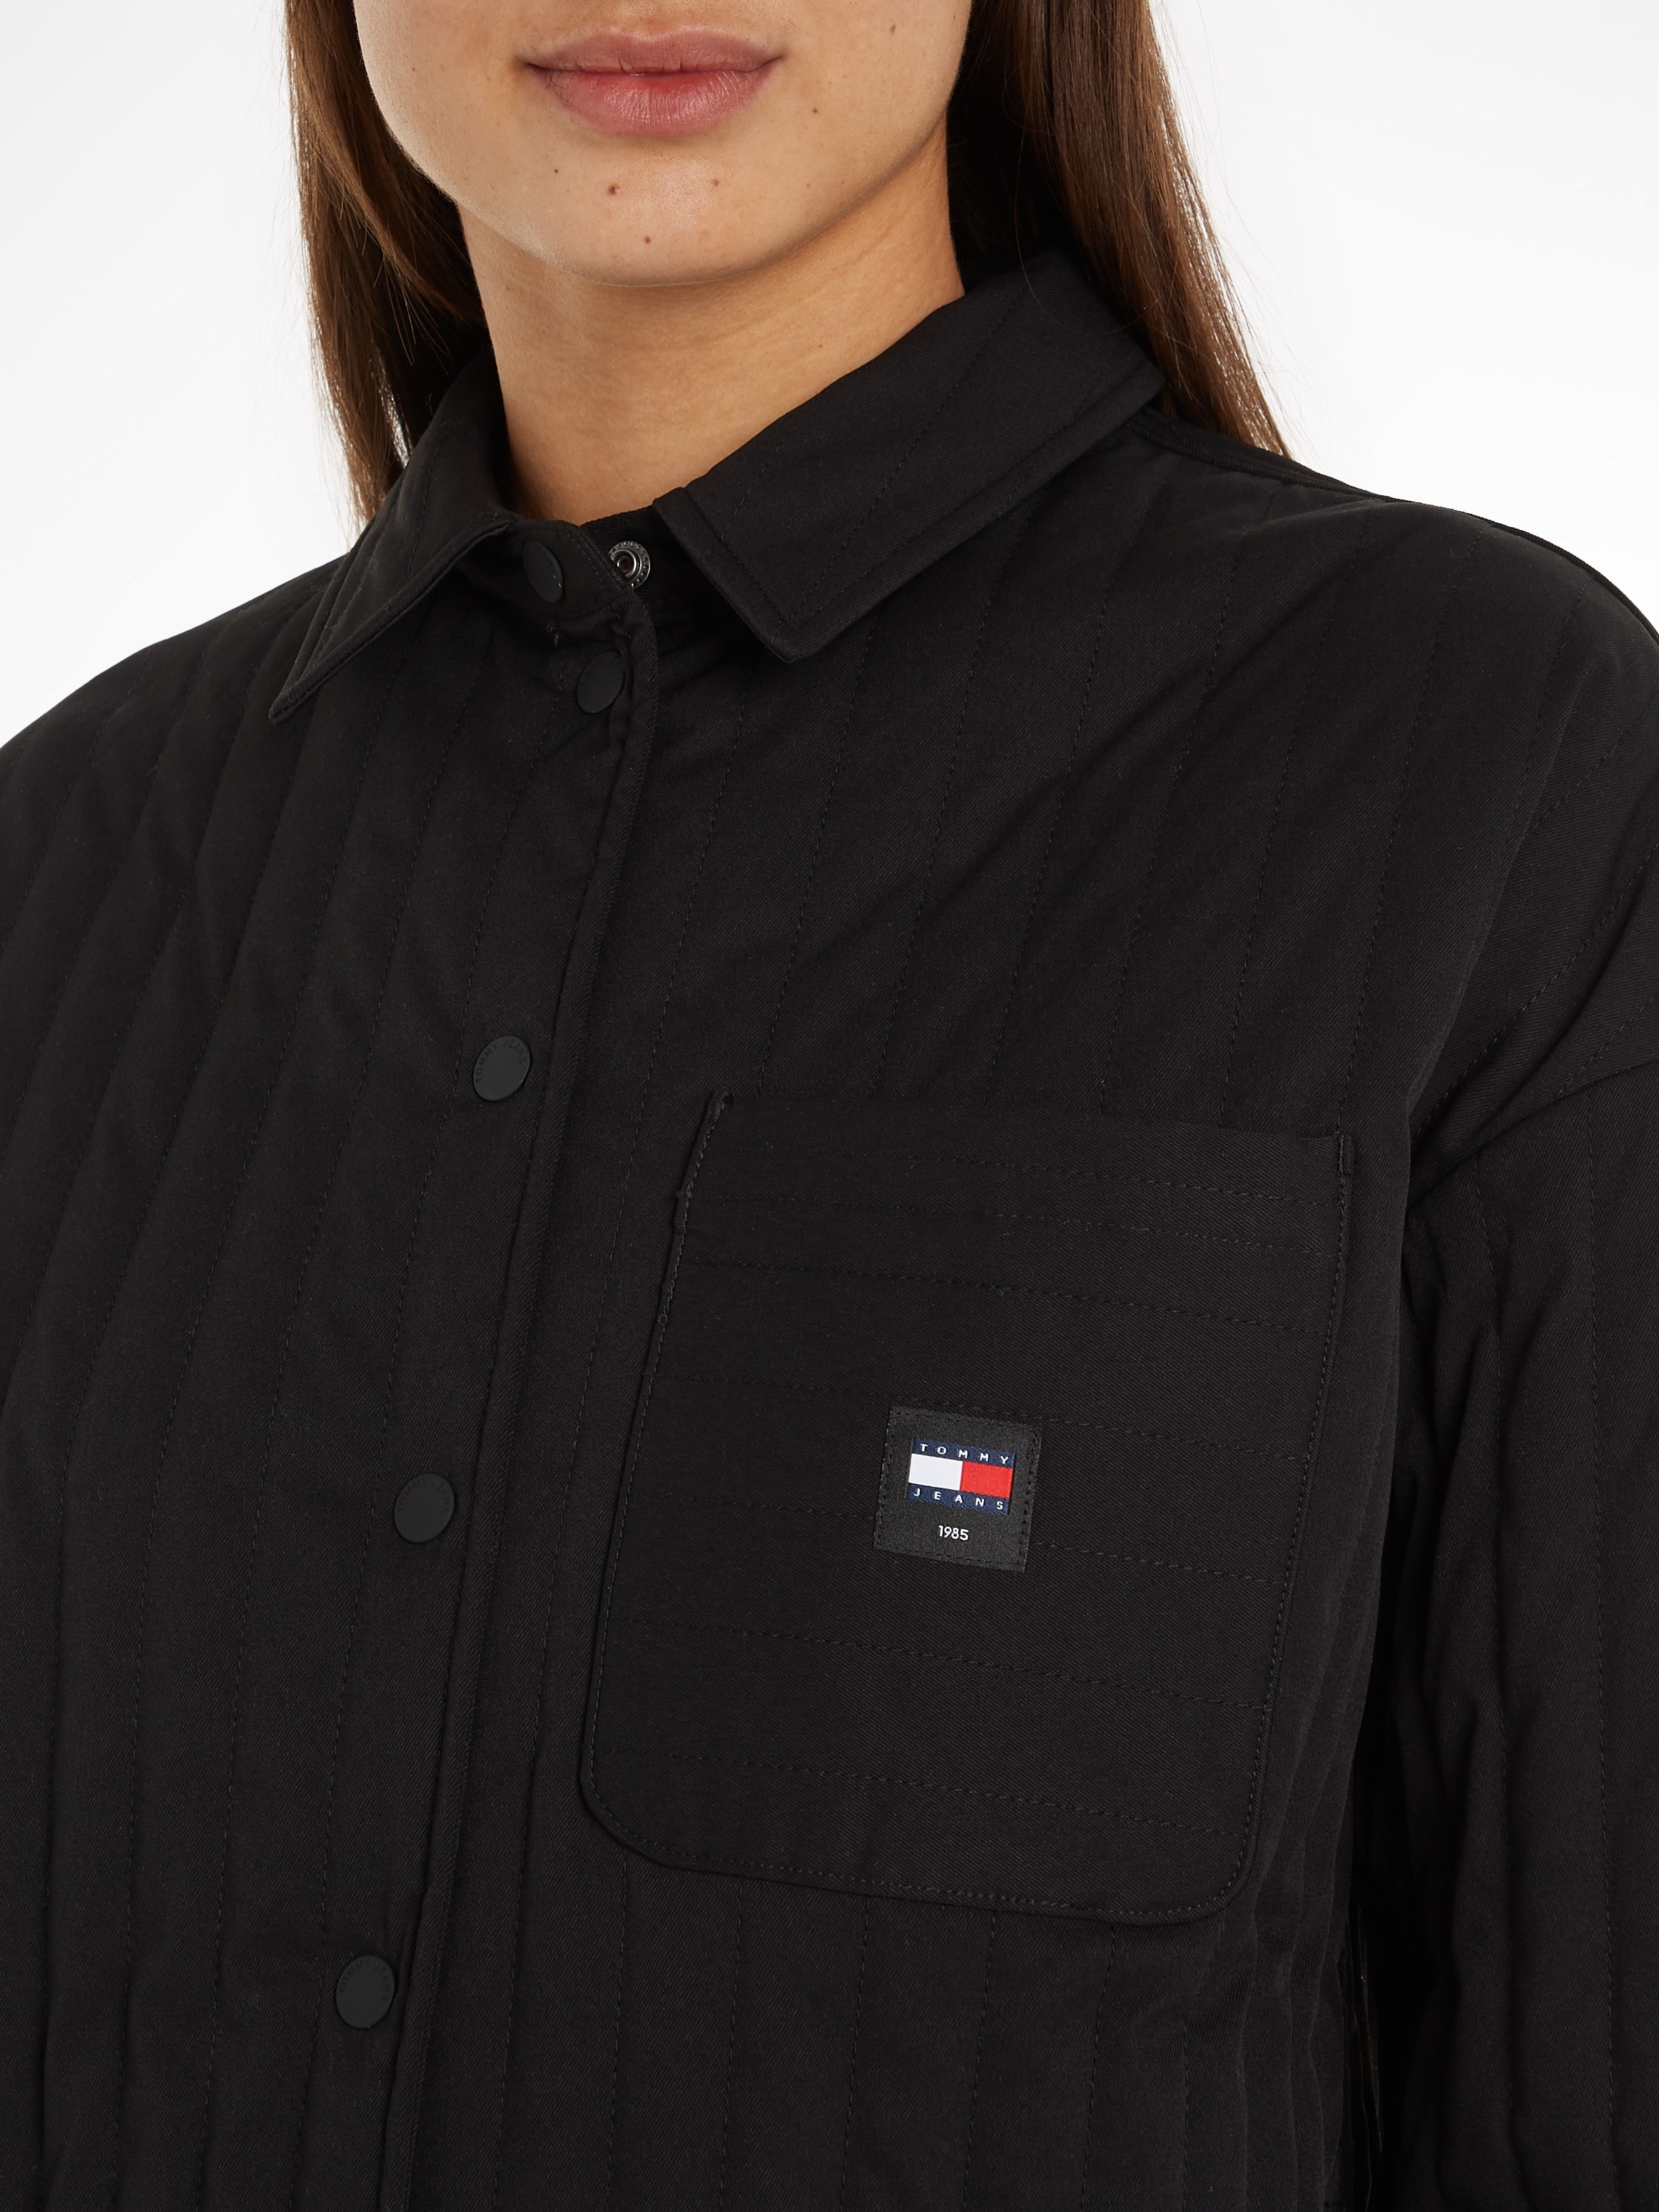 mit OVERSHIRT«, walking | QUILTED Blusentop kaufen I\'m Logopatch Jeans »TJW Tommy online